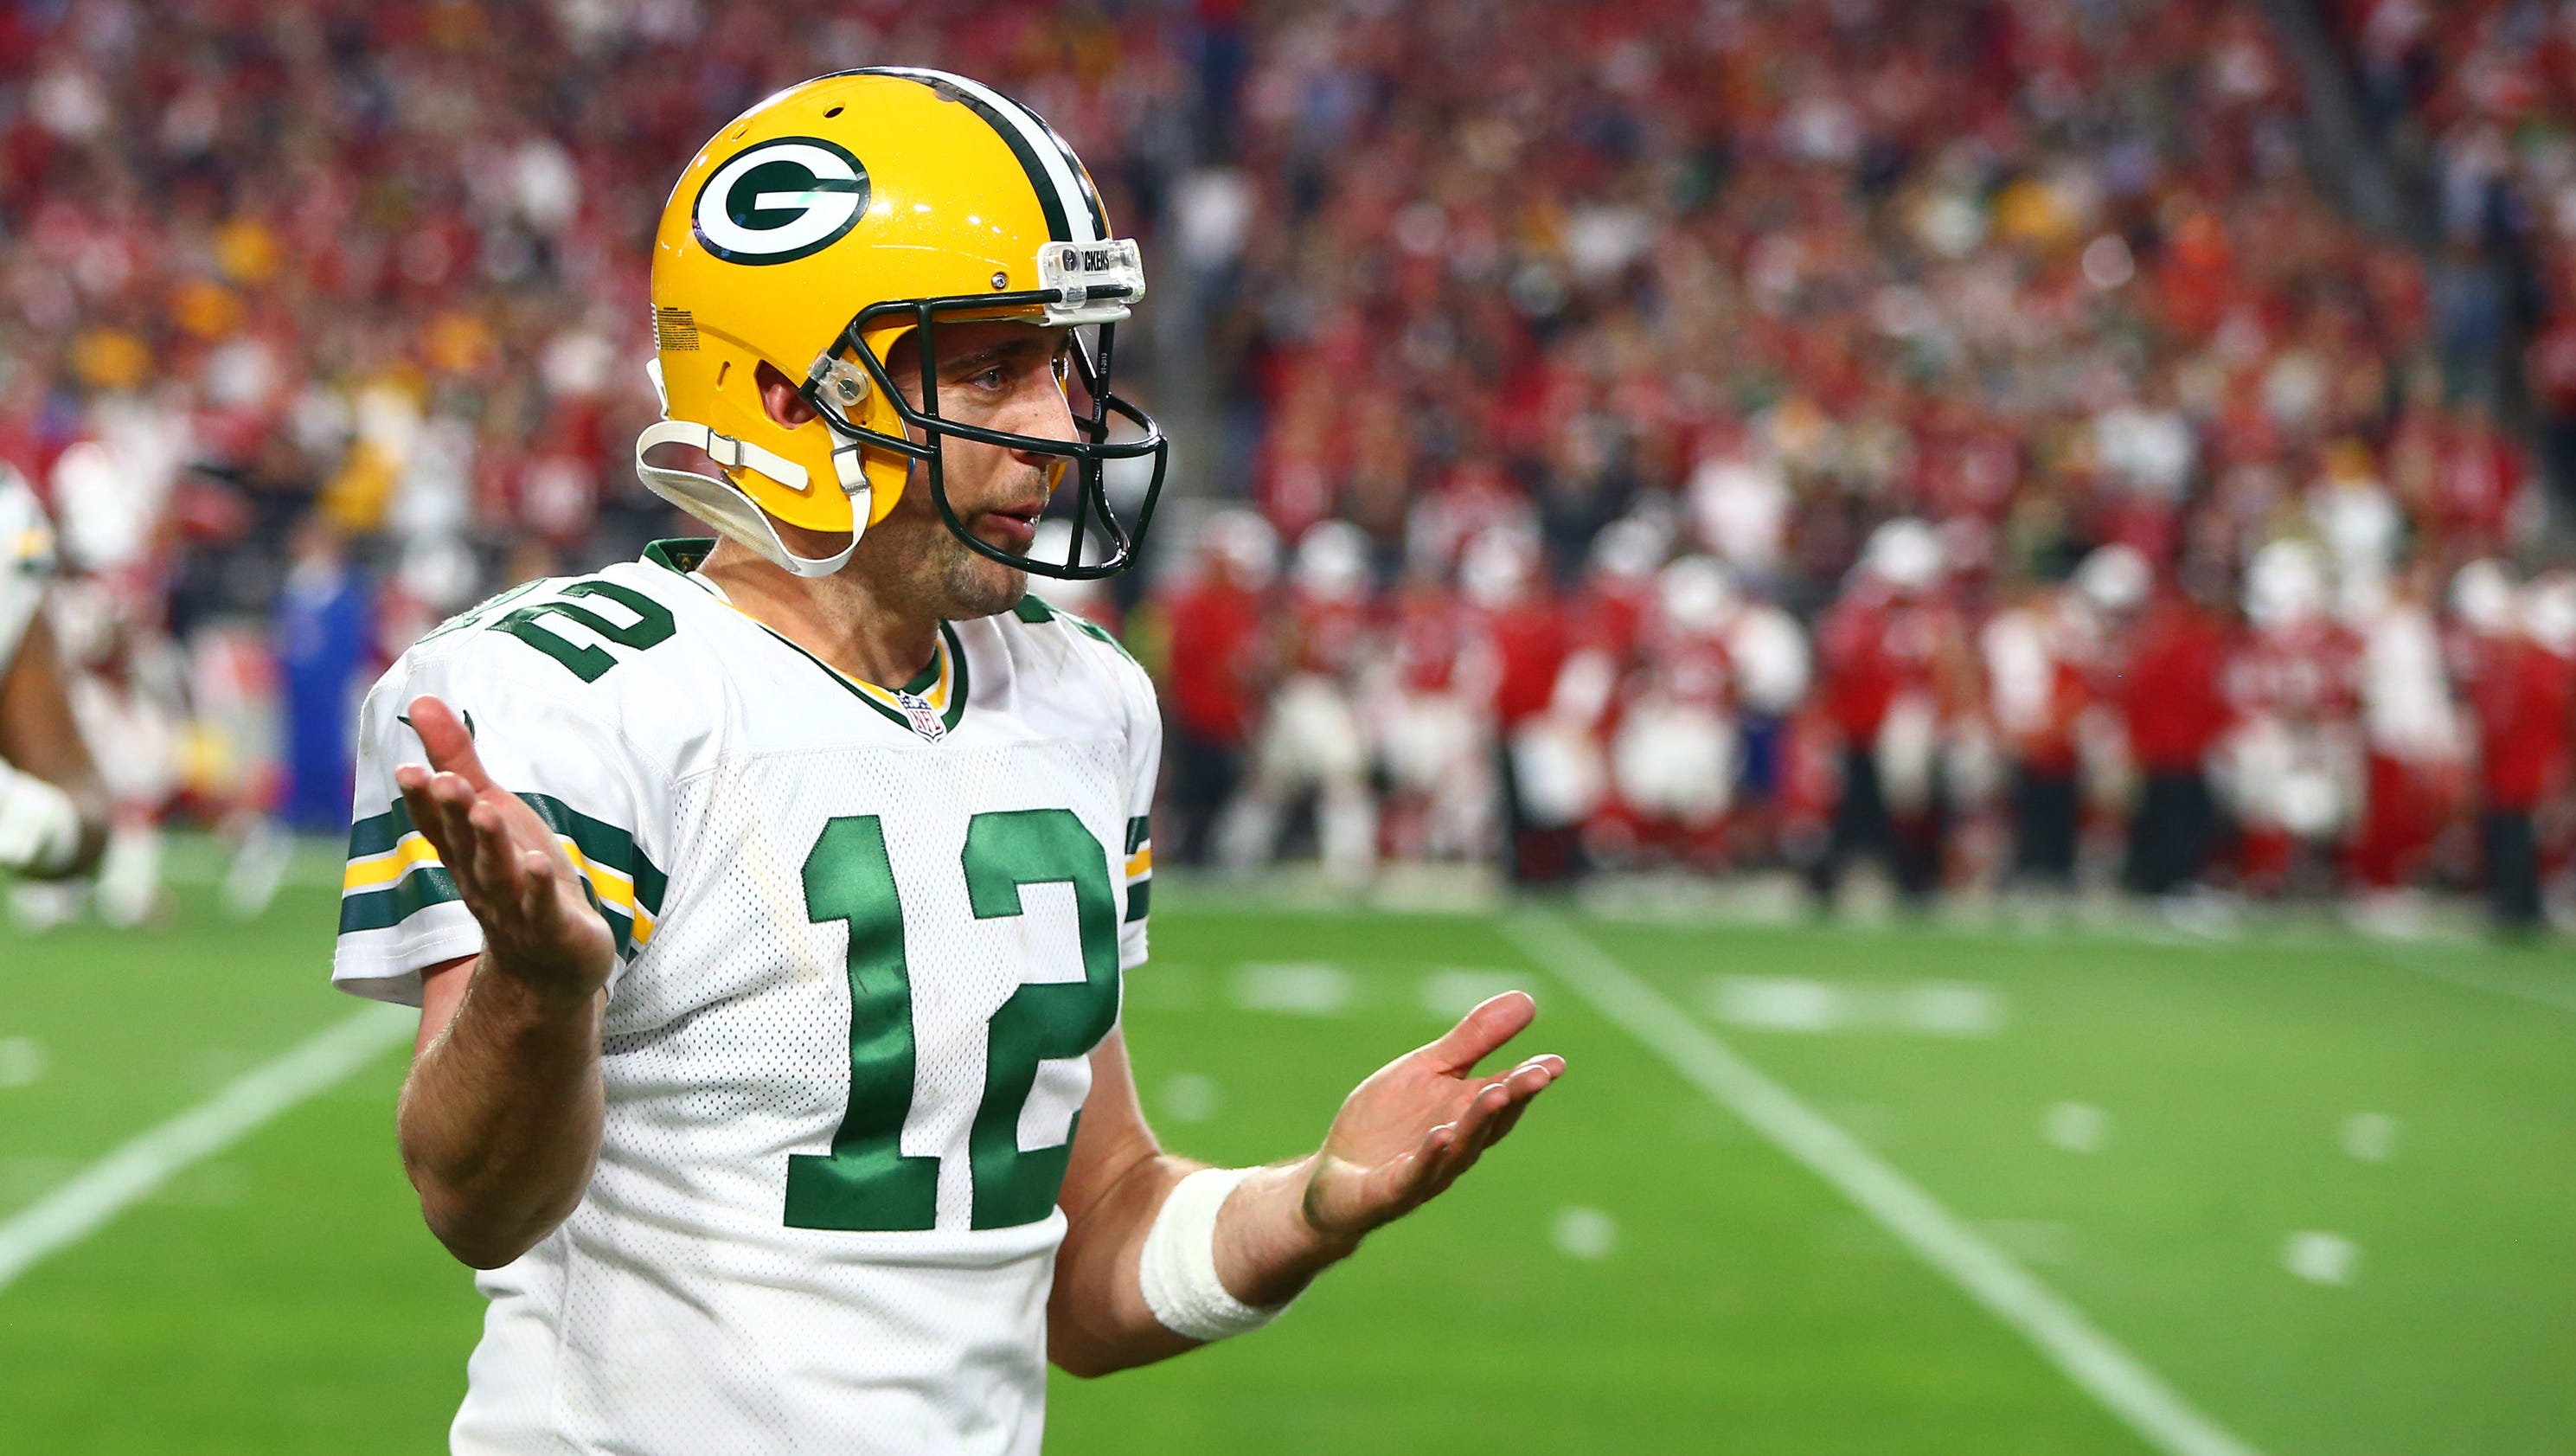 Five matchups that will define NFL Week 17: Can Aaron Rodgers repair Packers?